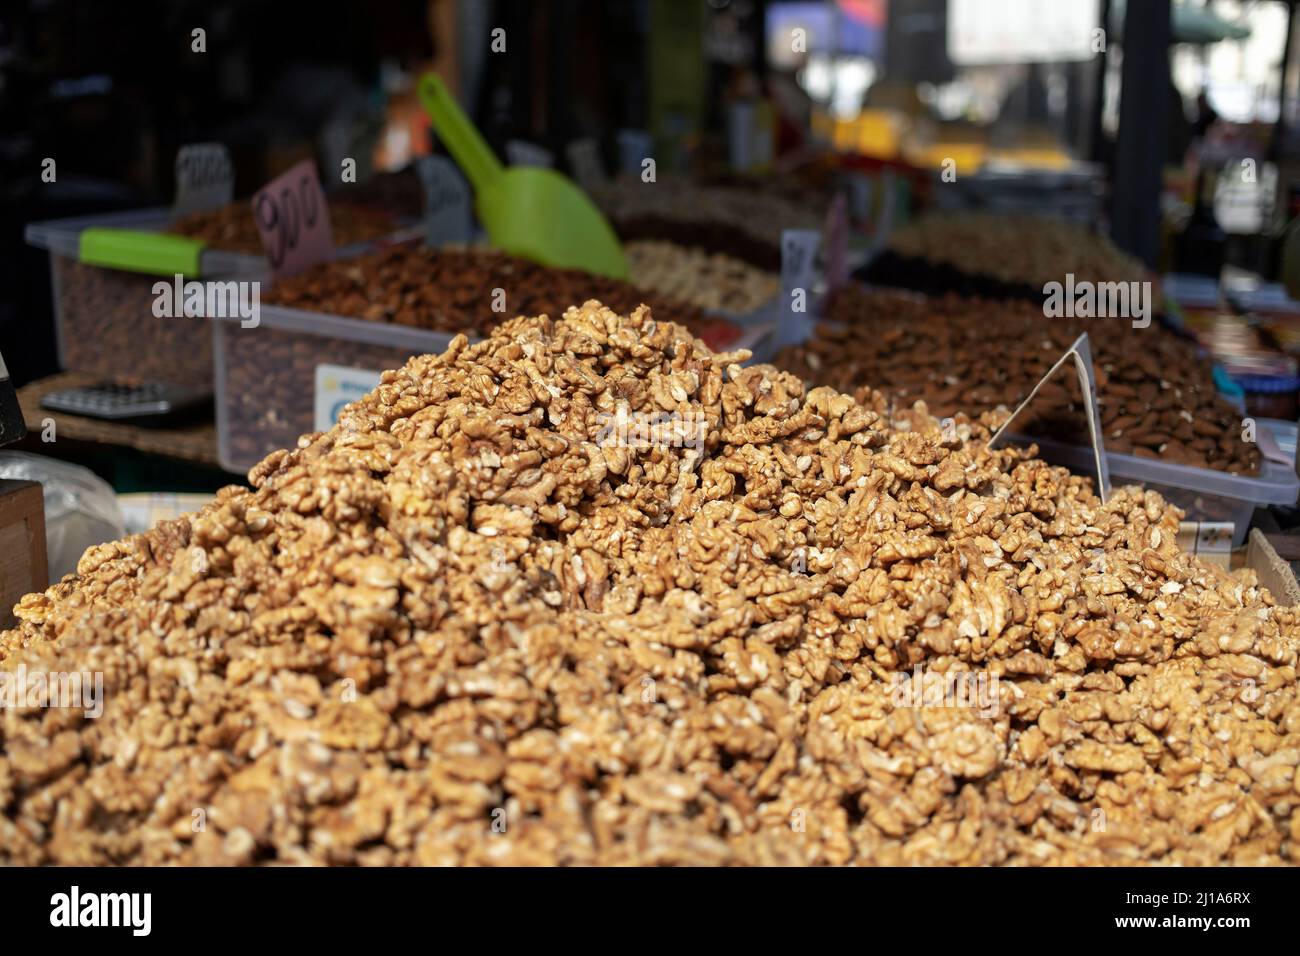 Nuts on a stall at a marketplace Stock Photo